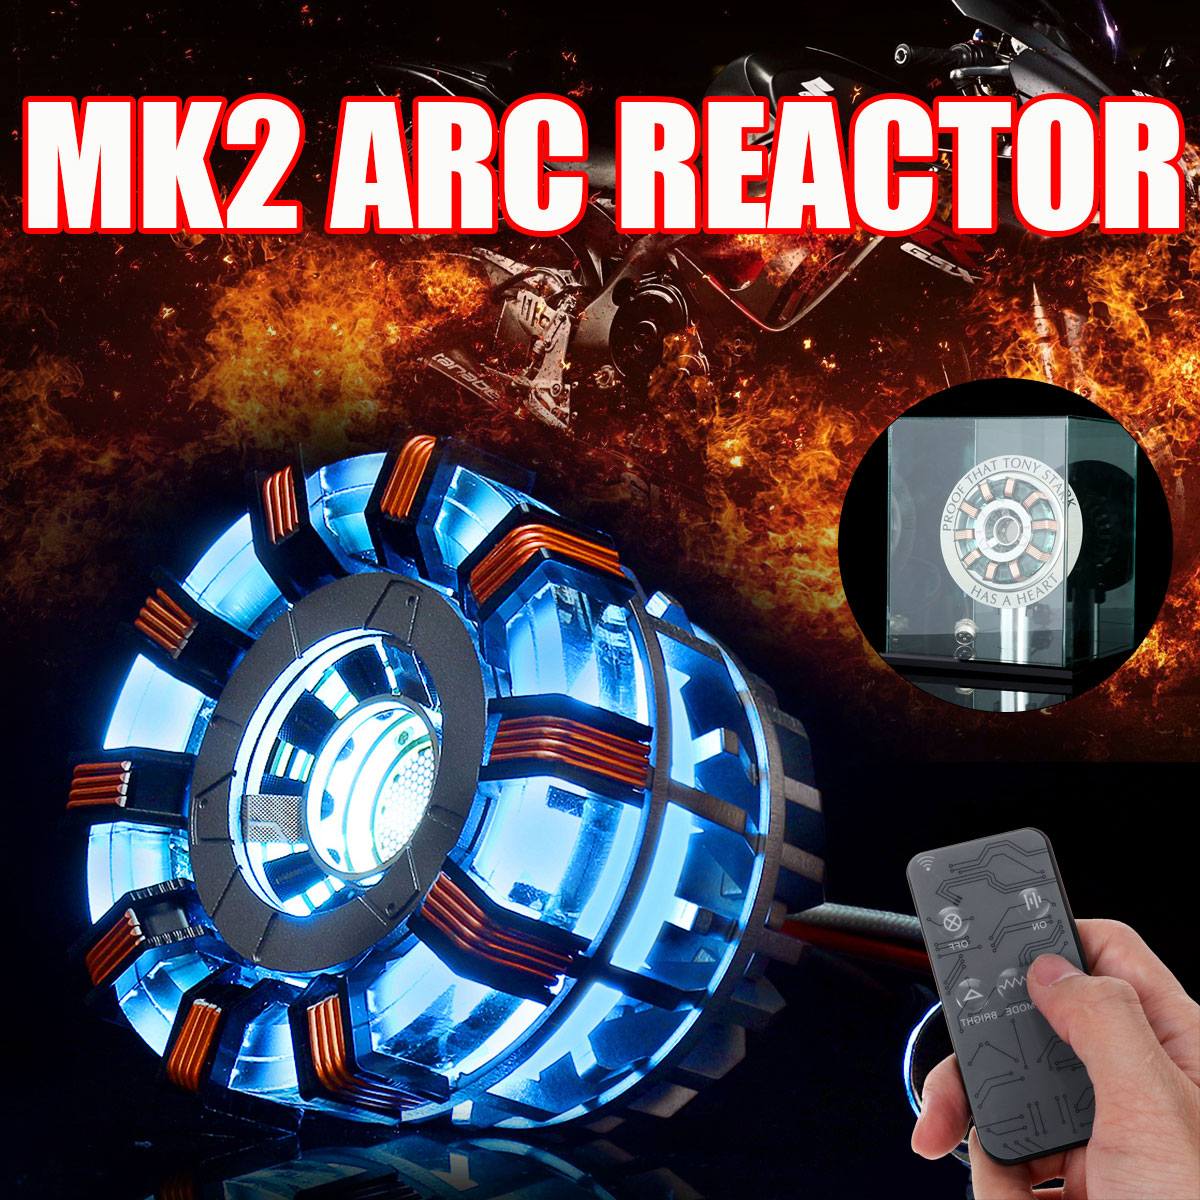 MK1/MK2 1:1 Scale Arc Reactor Need To Assemble Reactor USB LED Light Action Model Building Kits With Remote Control For Adult